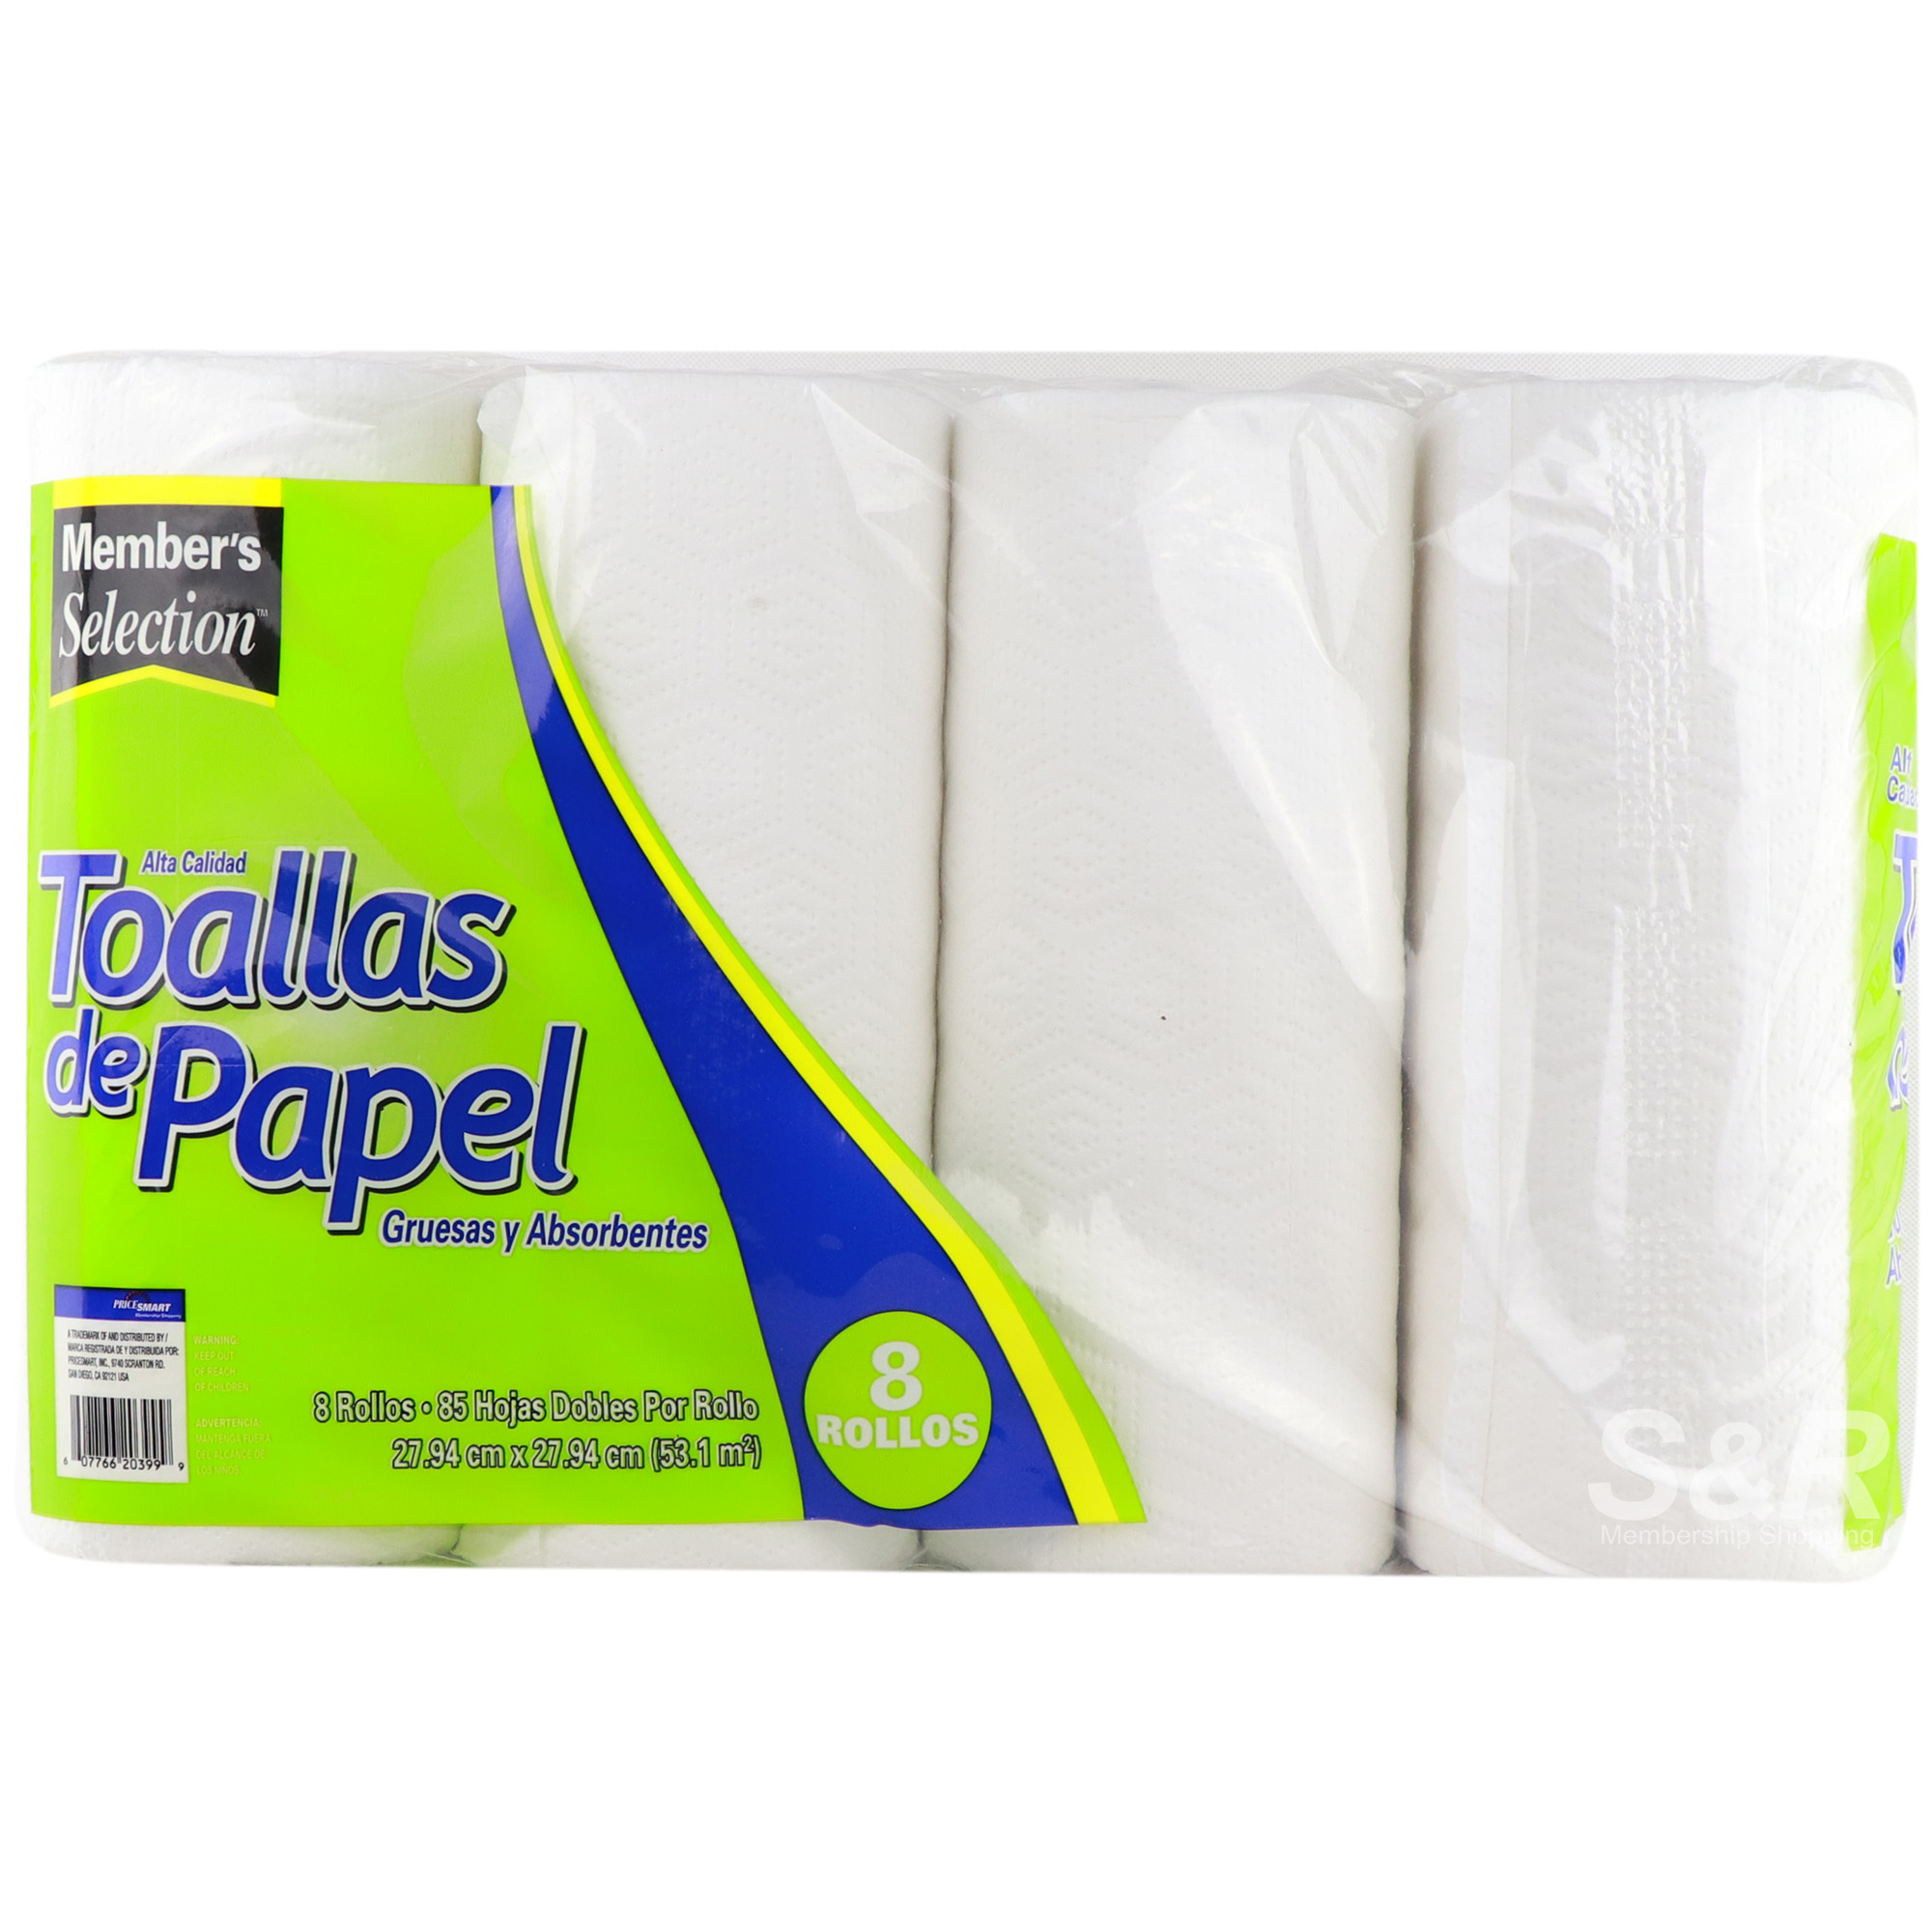 Member's Section 2-Ply Premium Quality Paper Towels 8 rolls